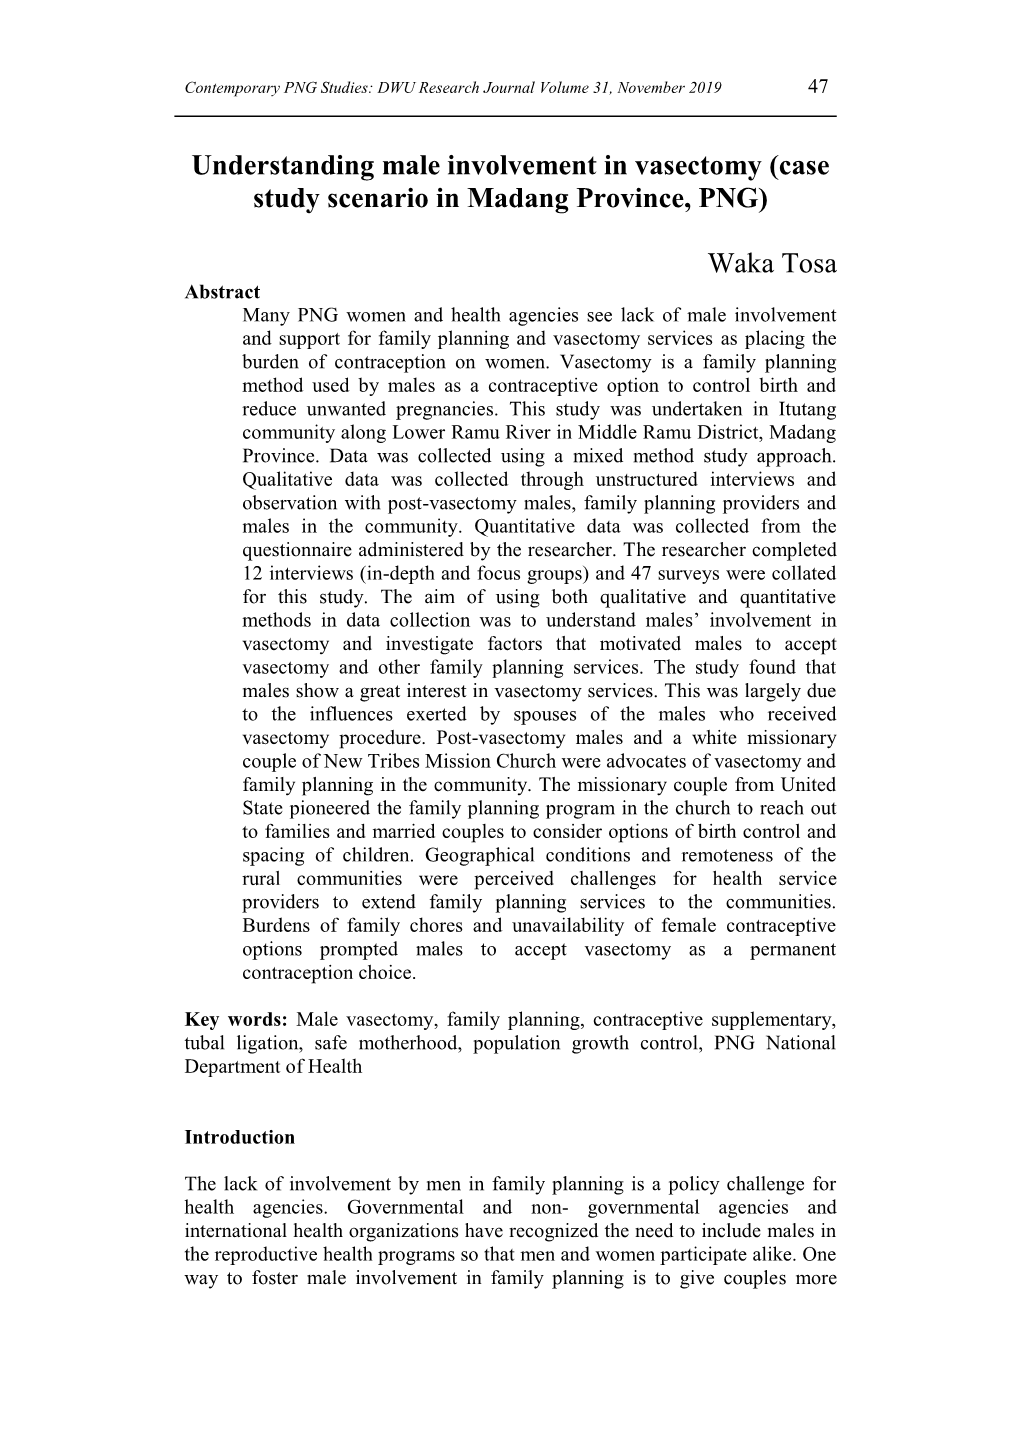 Understanding Male Involvement in Vasectomy (Case Study Scenario in Madang Province, PNG)